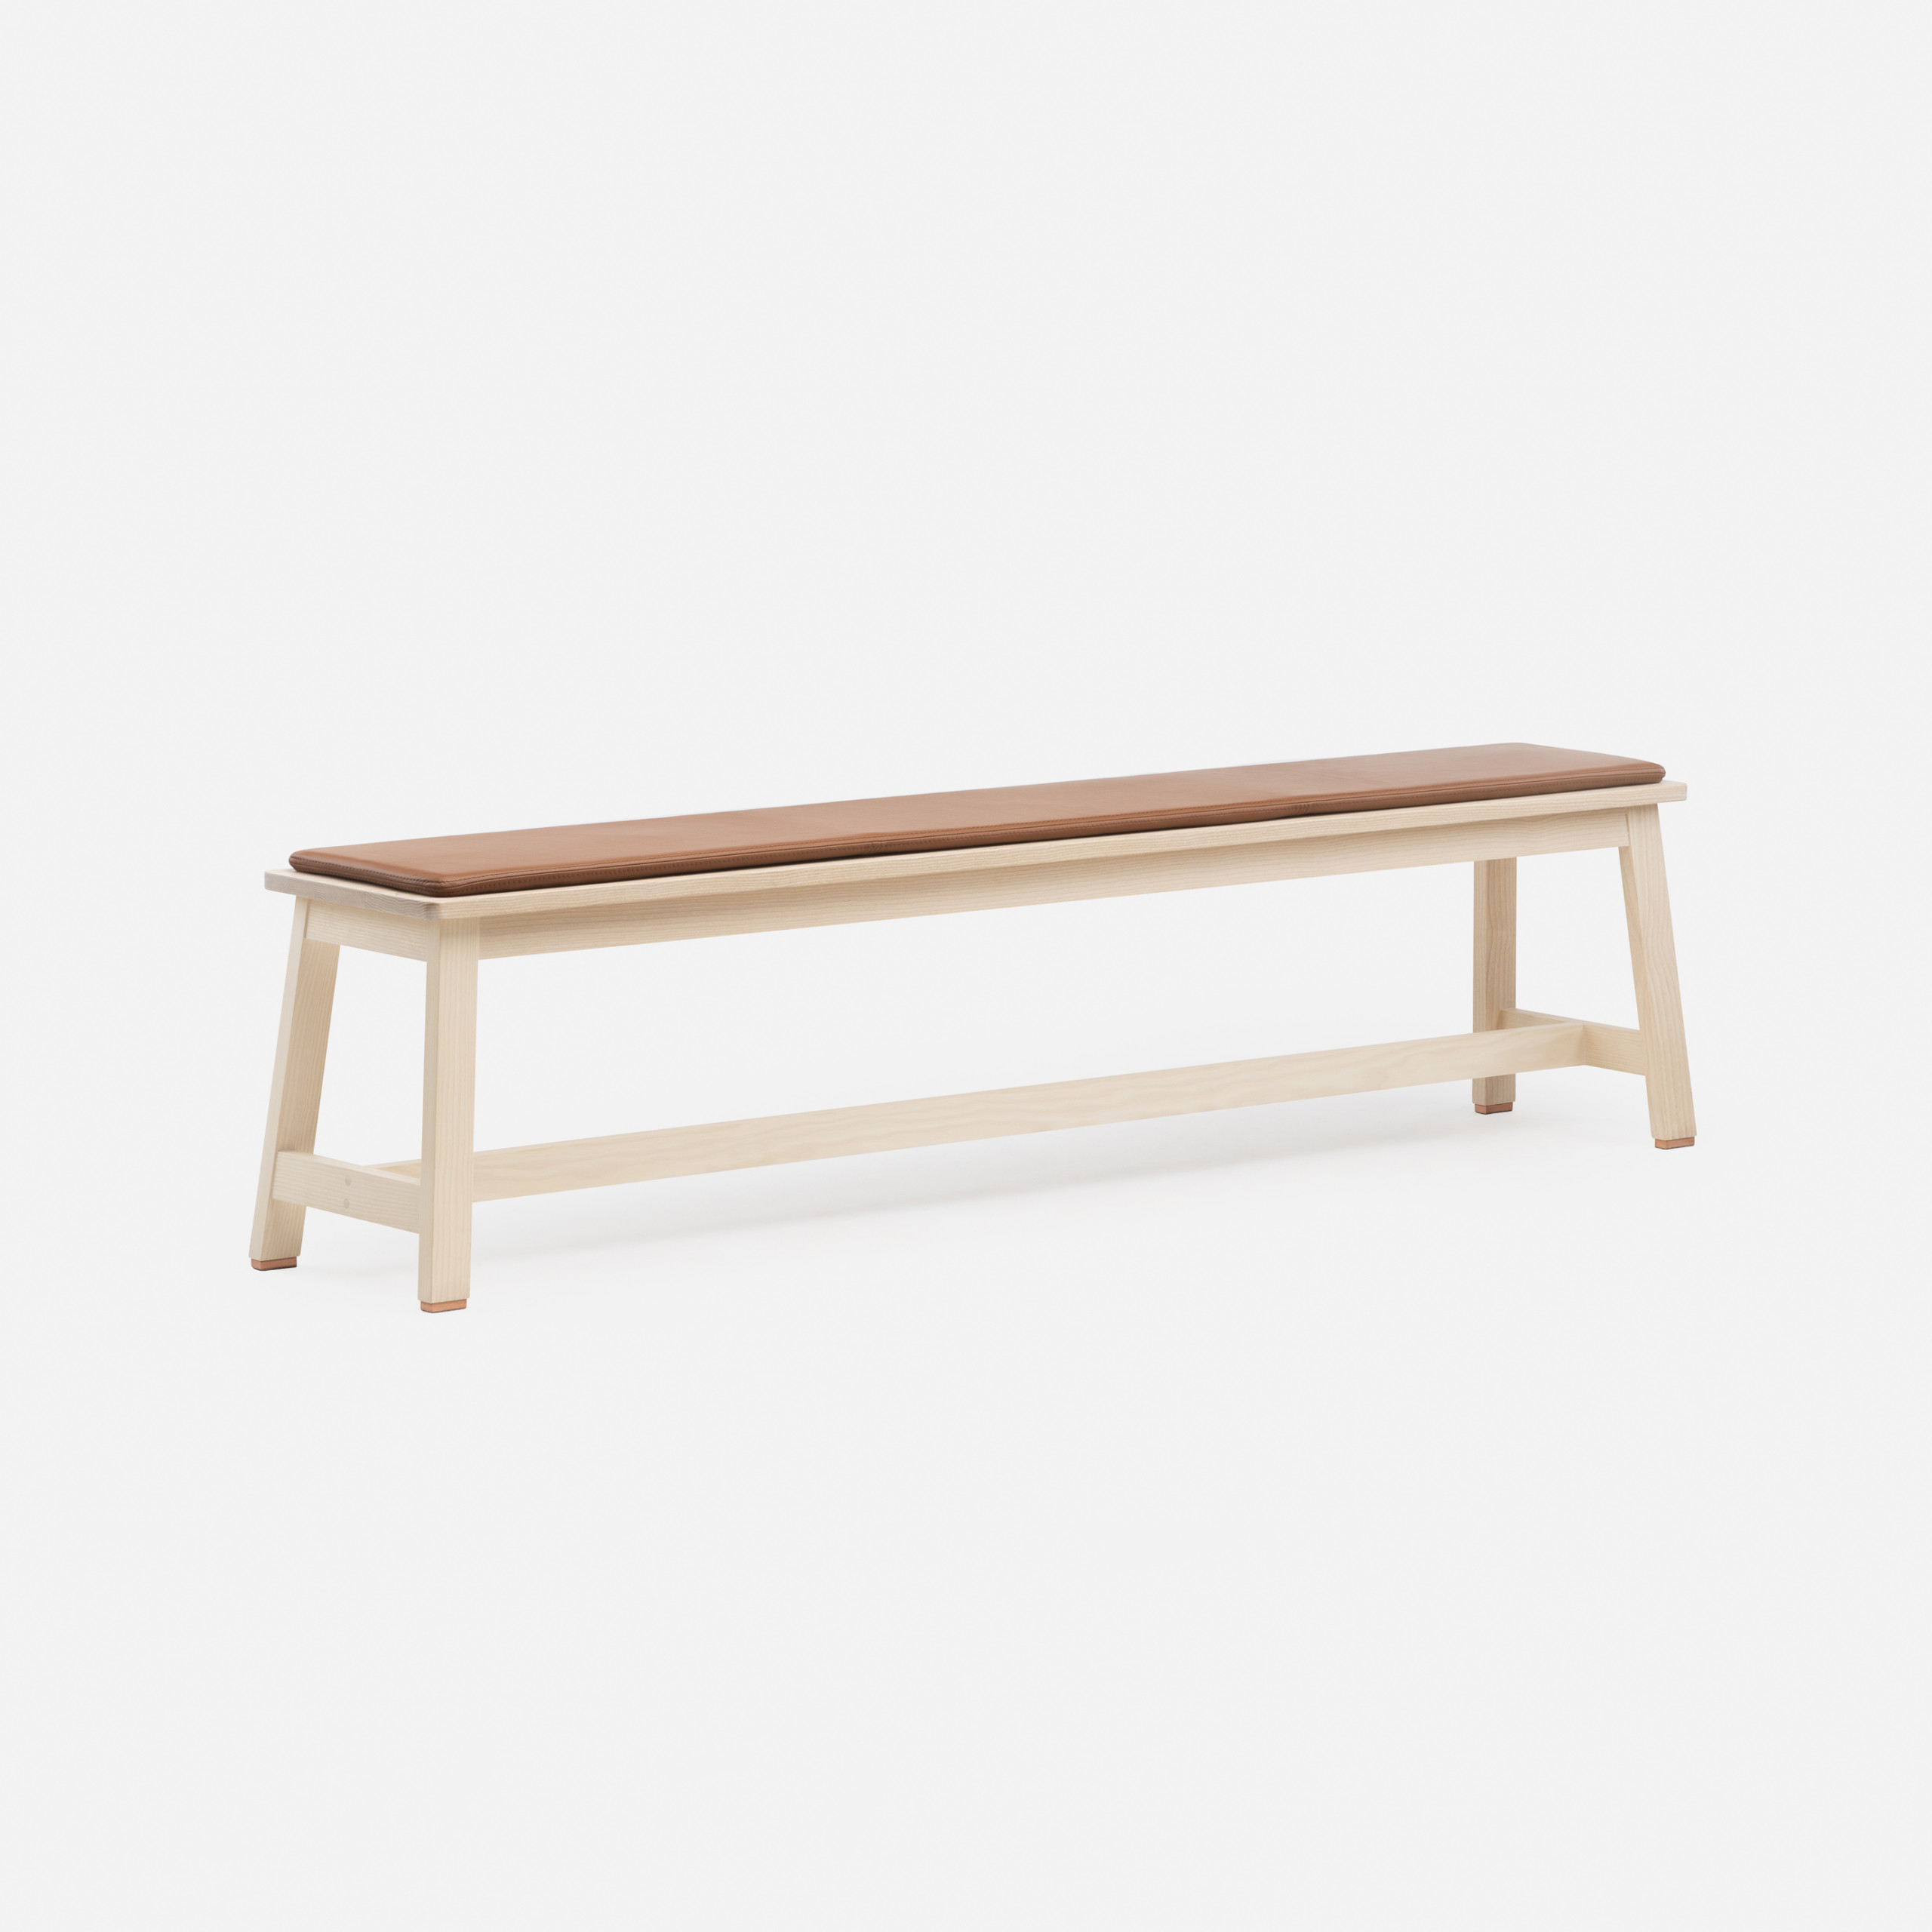 Bench | Ilse Crawford | The Future Perfect